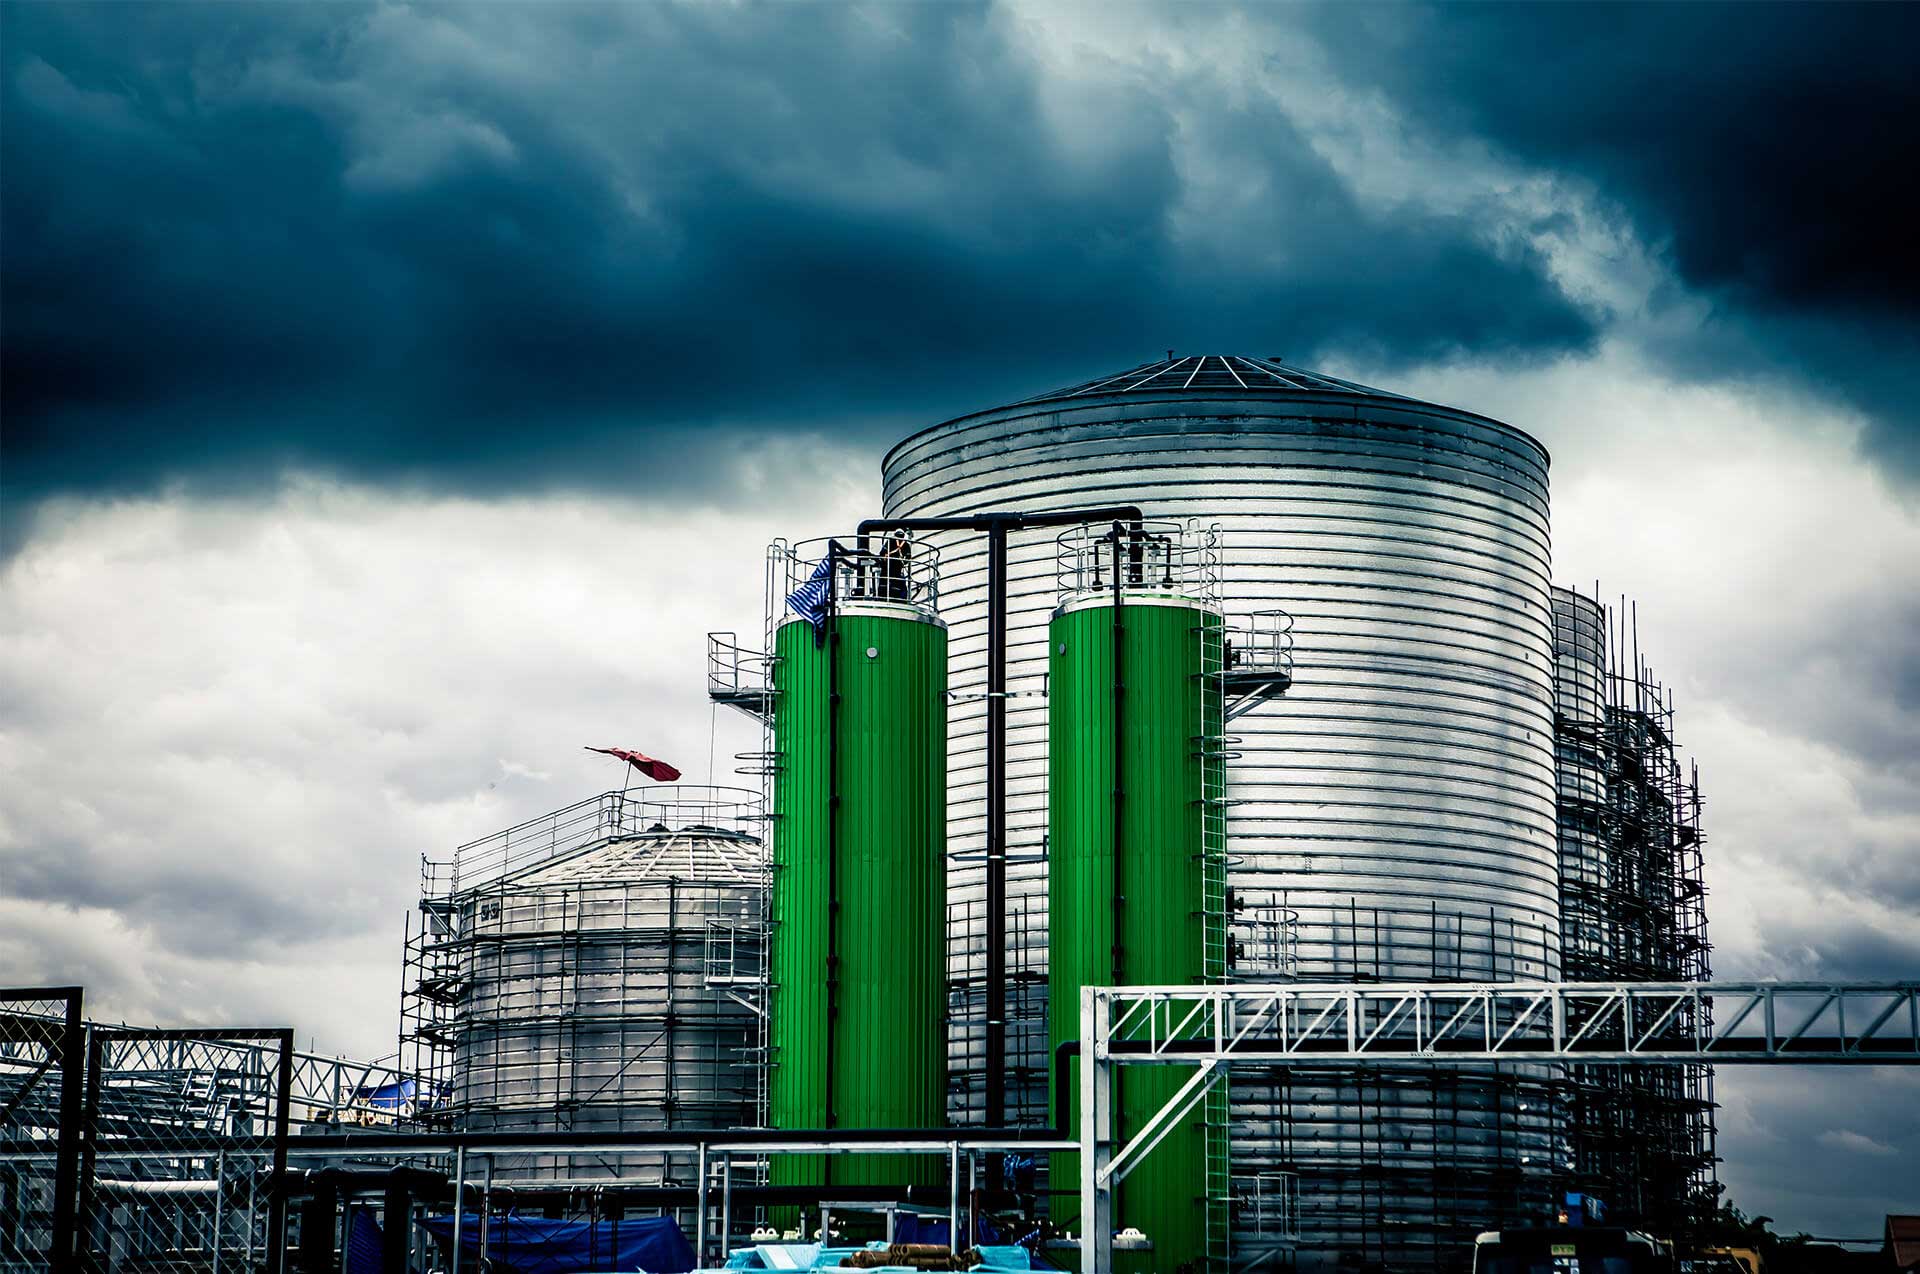 How to Mitigate Storm Risks on Chemical Supply Chains